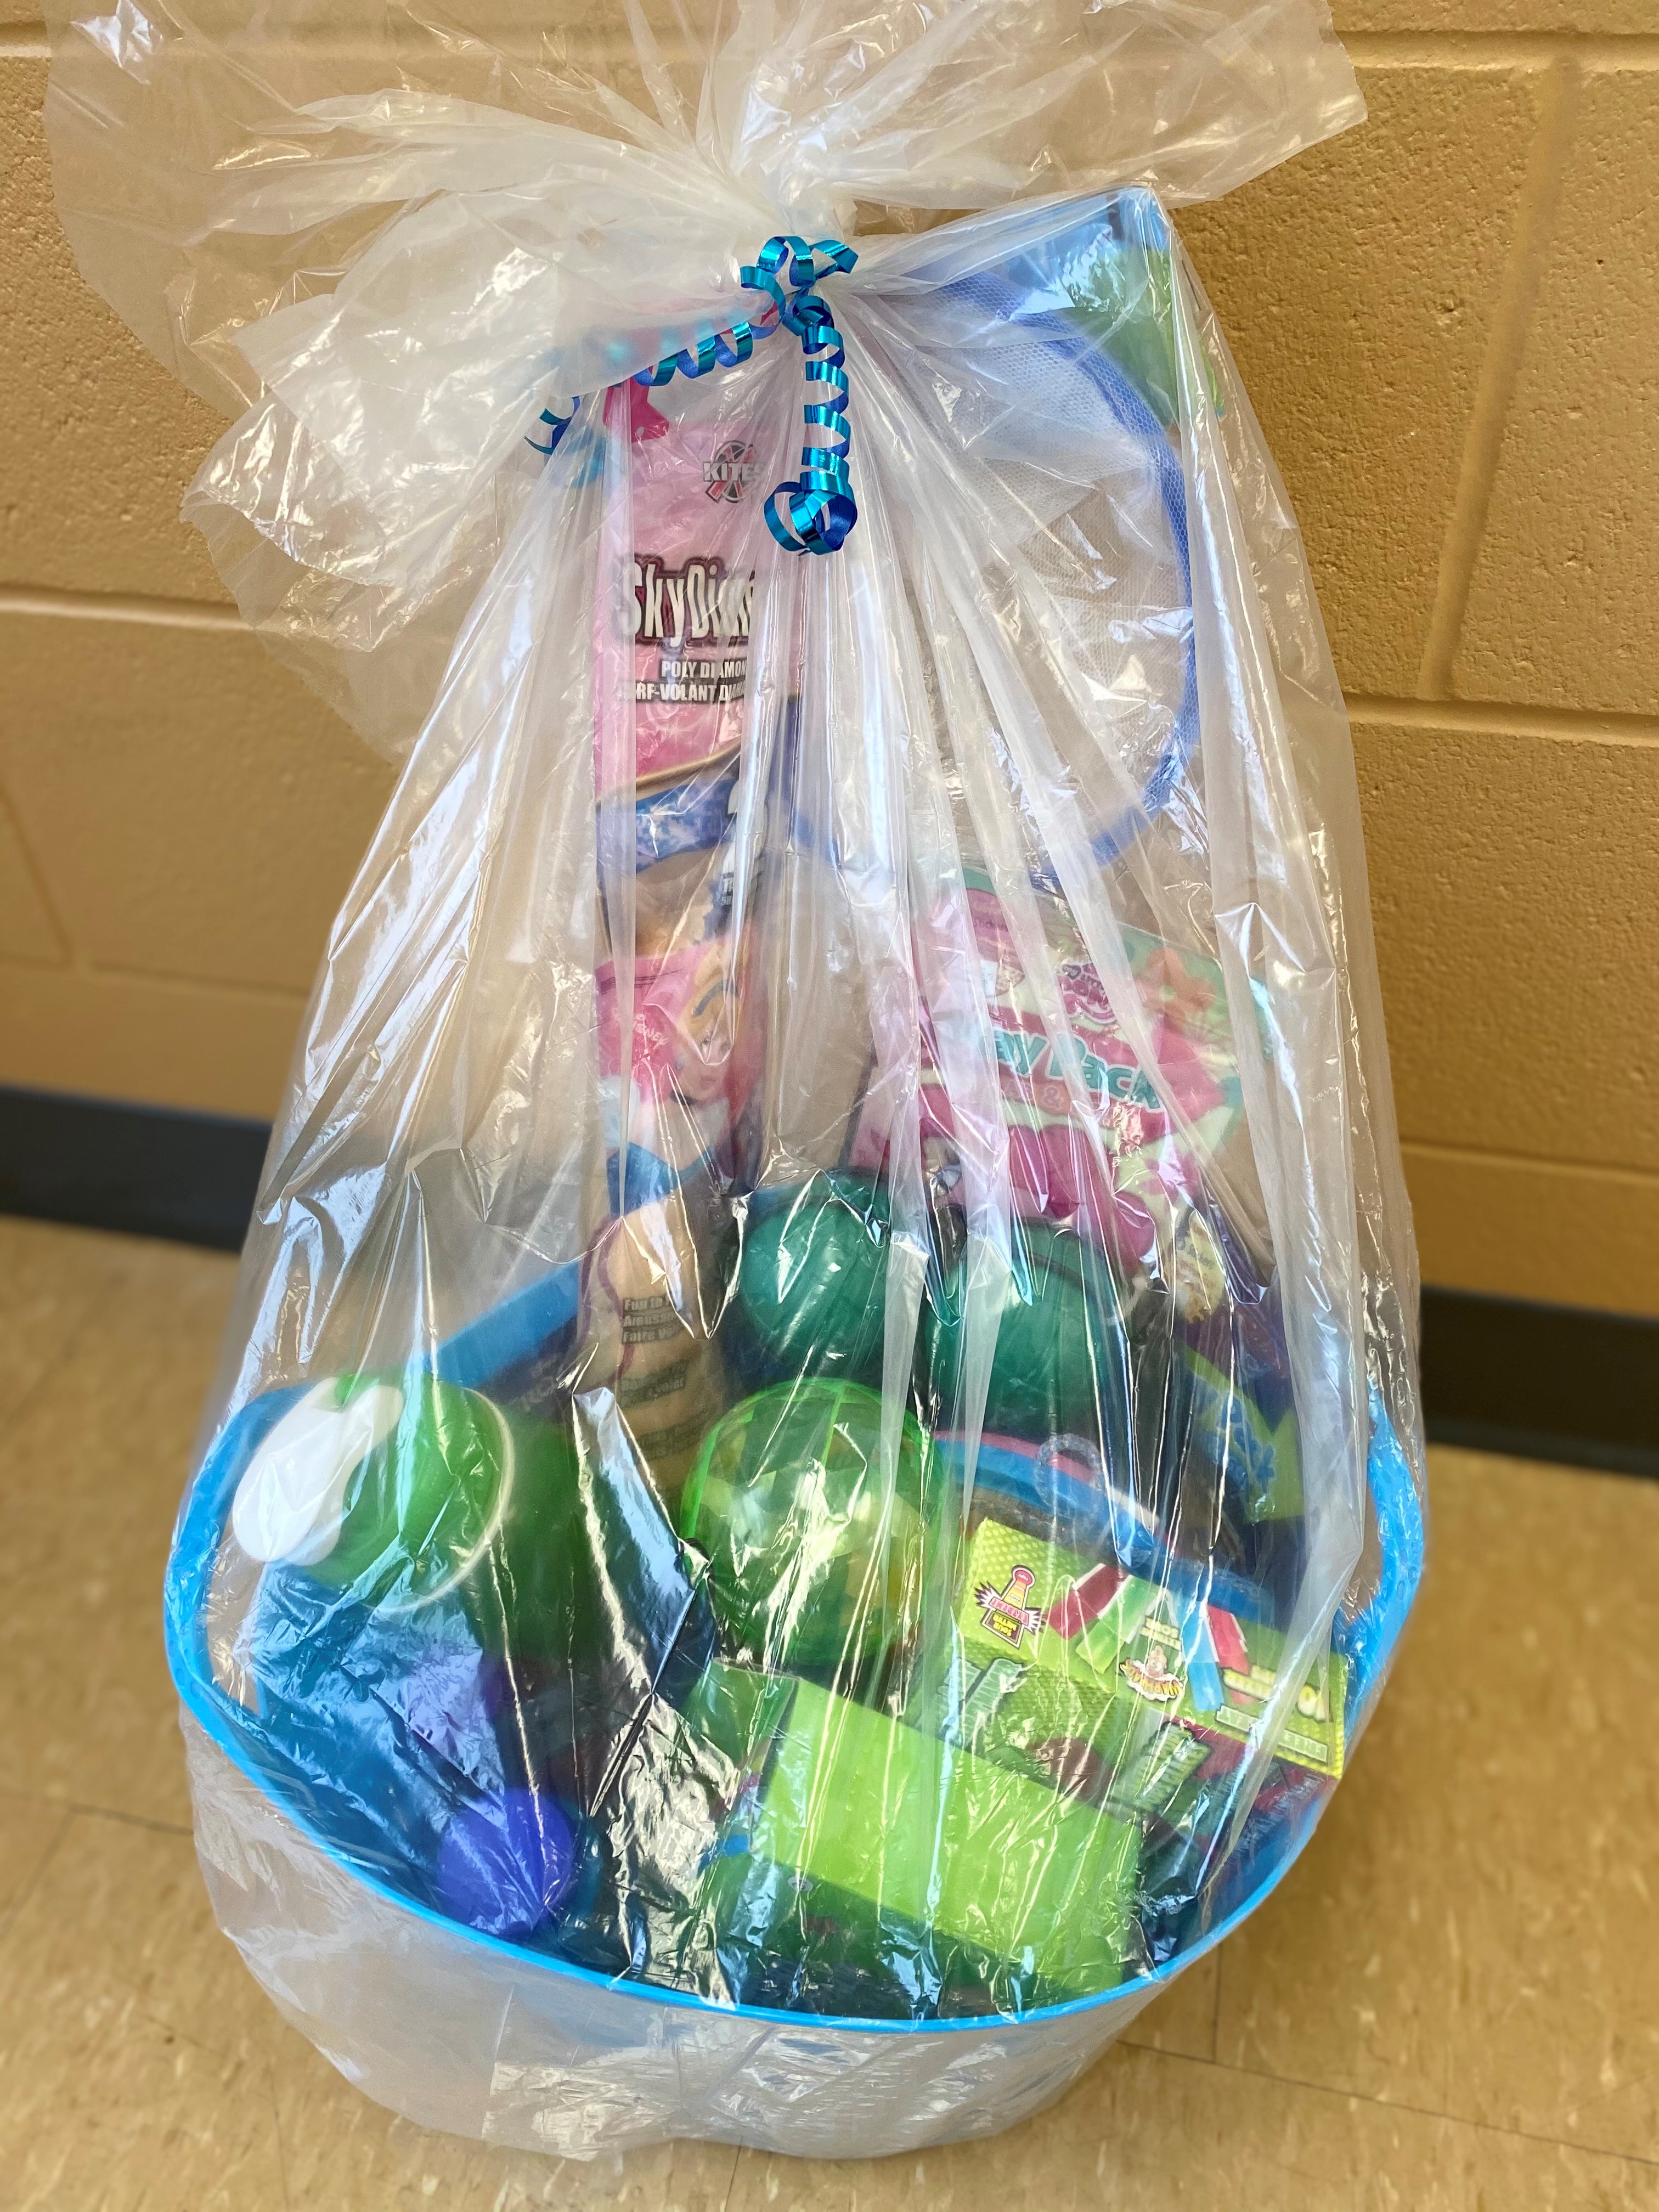 Basket filled with family prizes